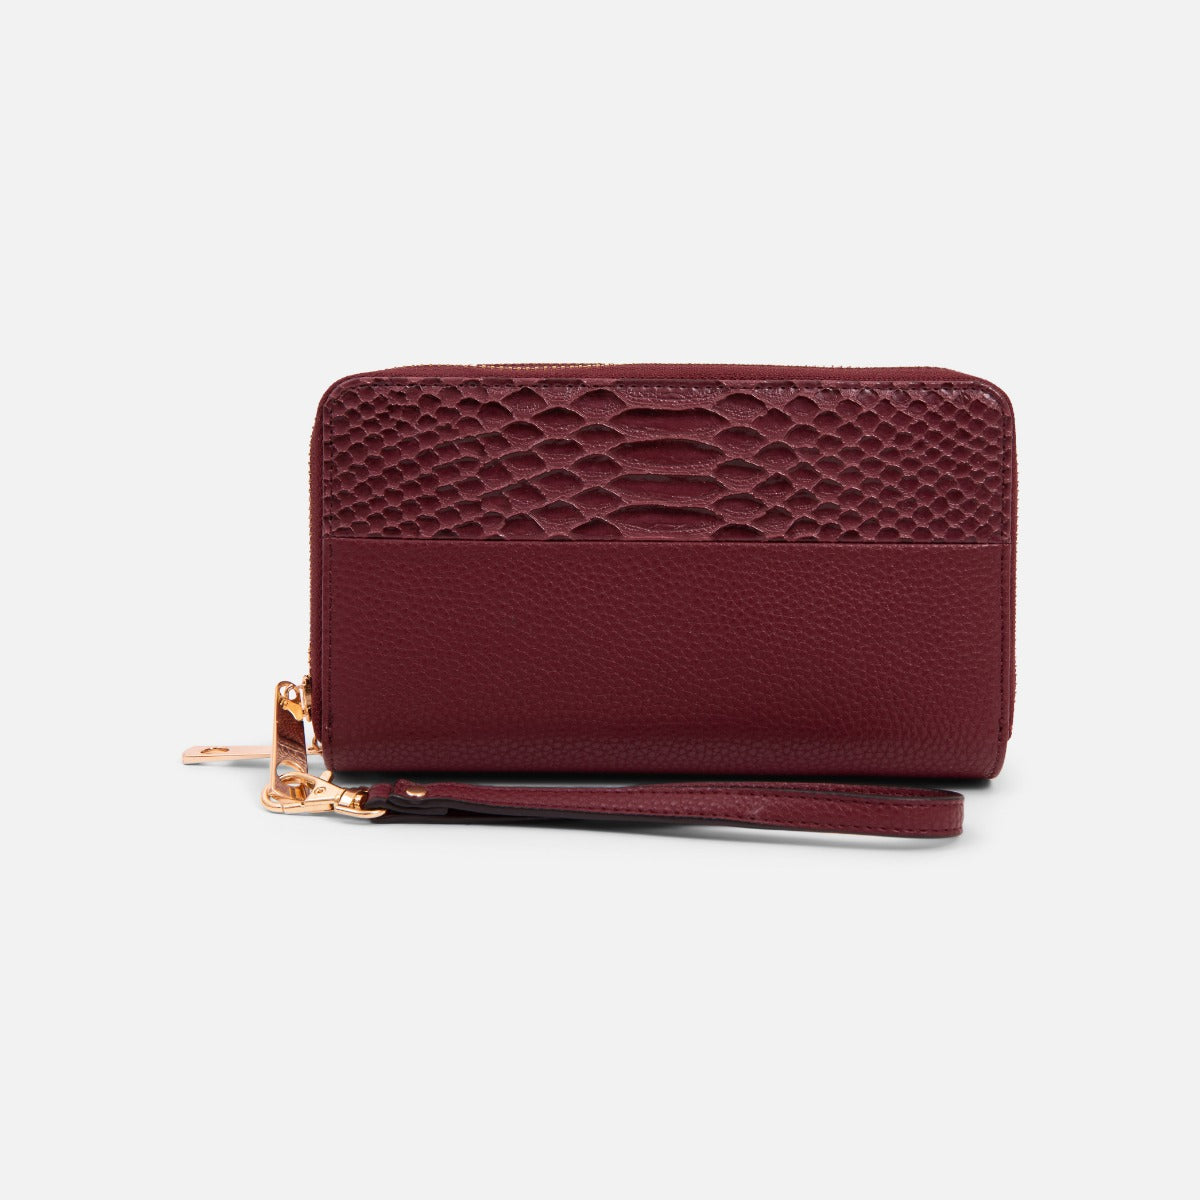 Double burgundy wallet with snake pattern 